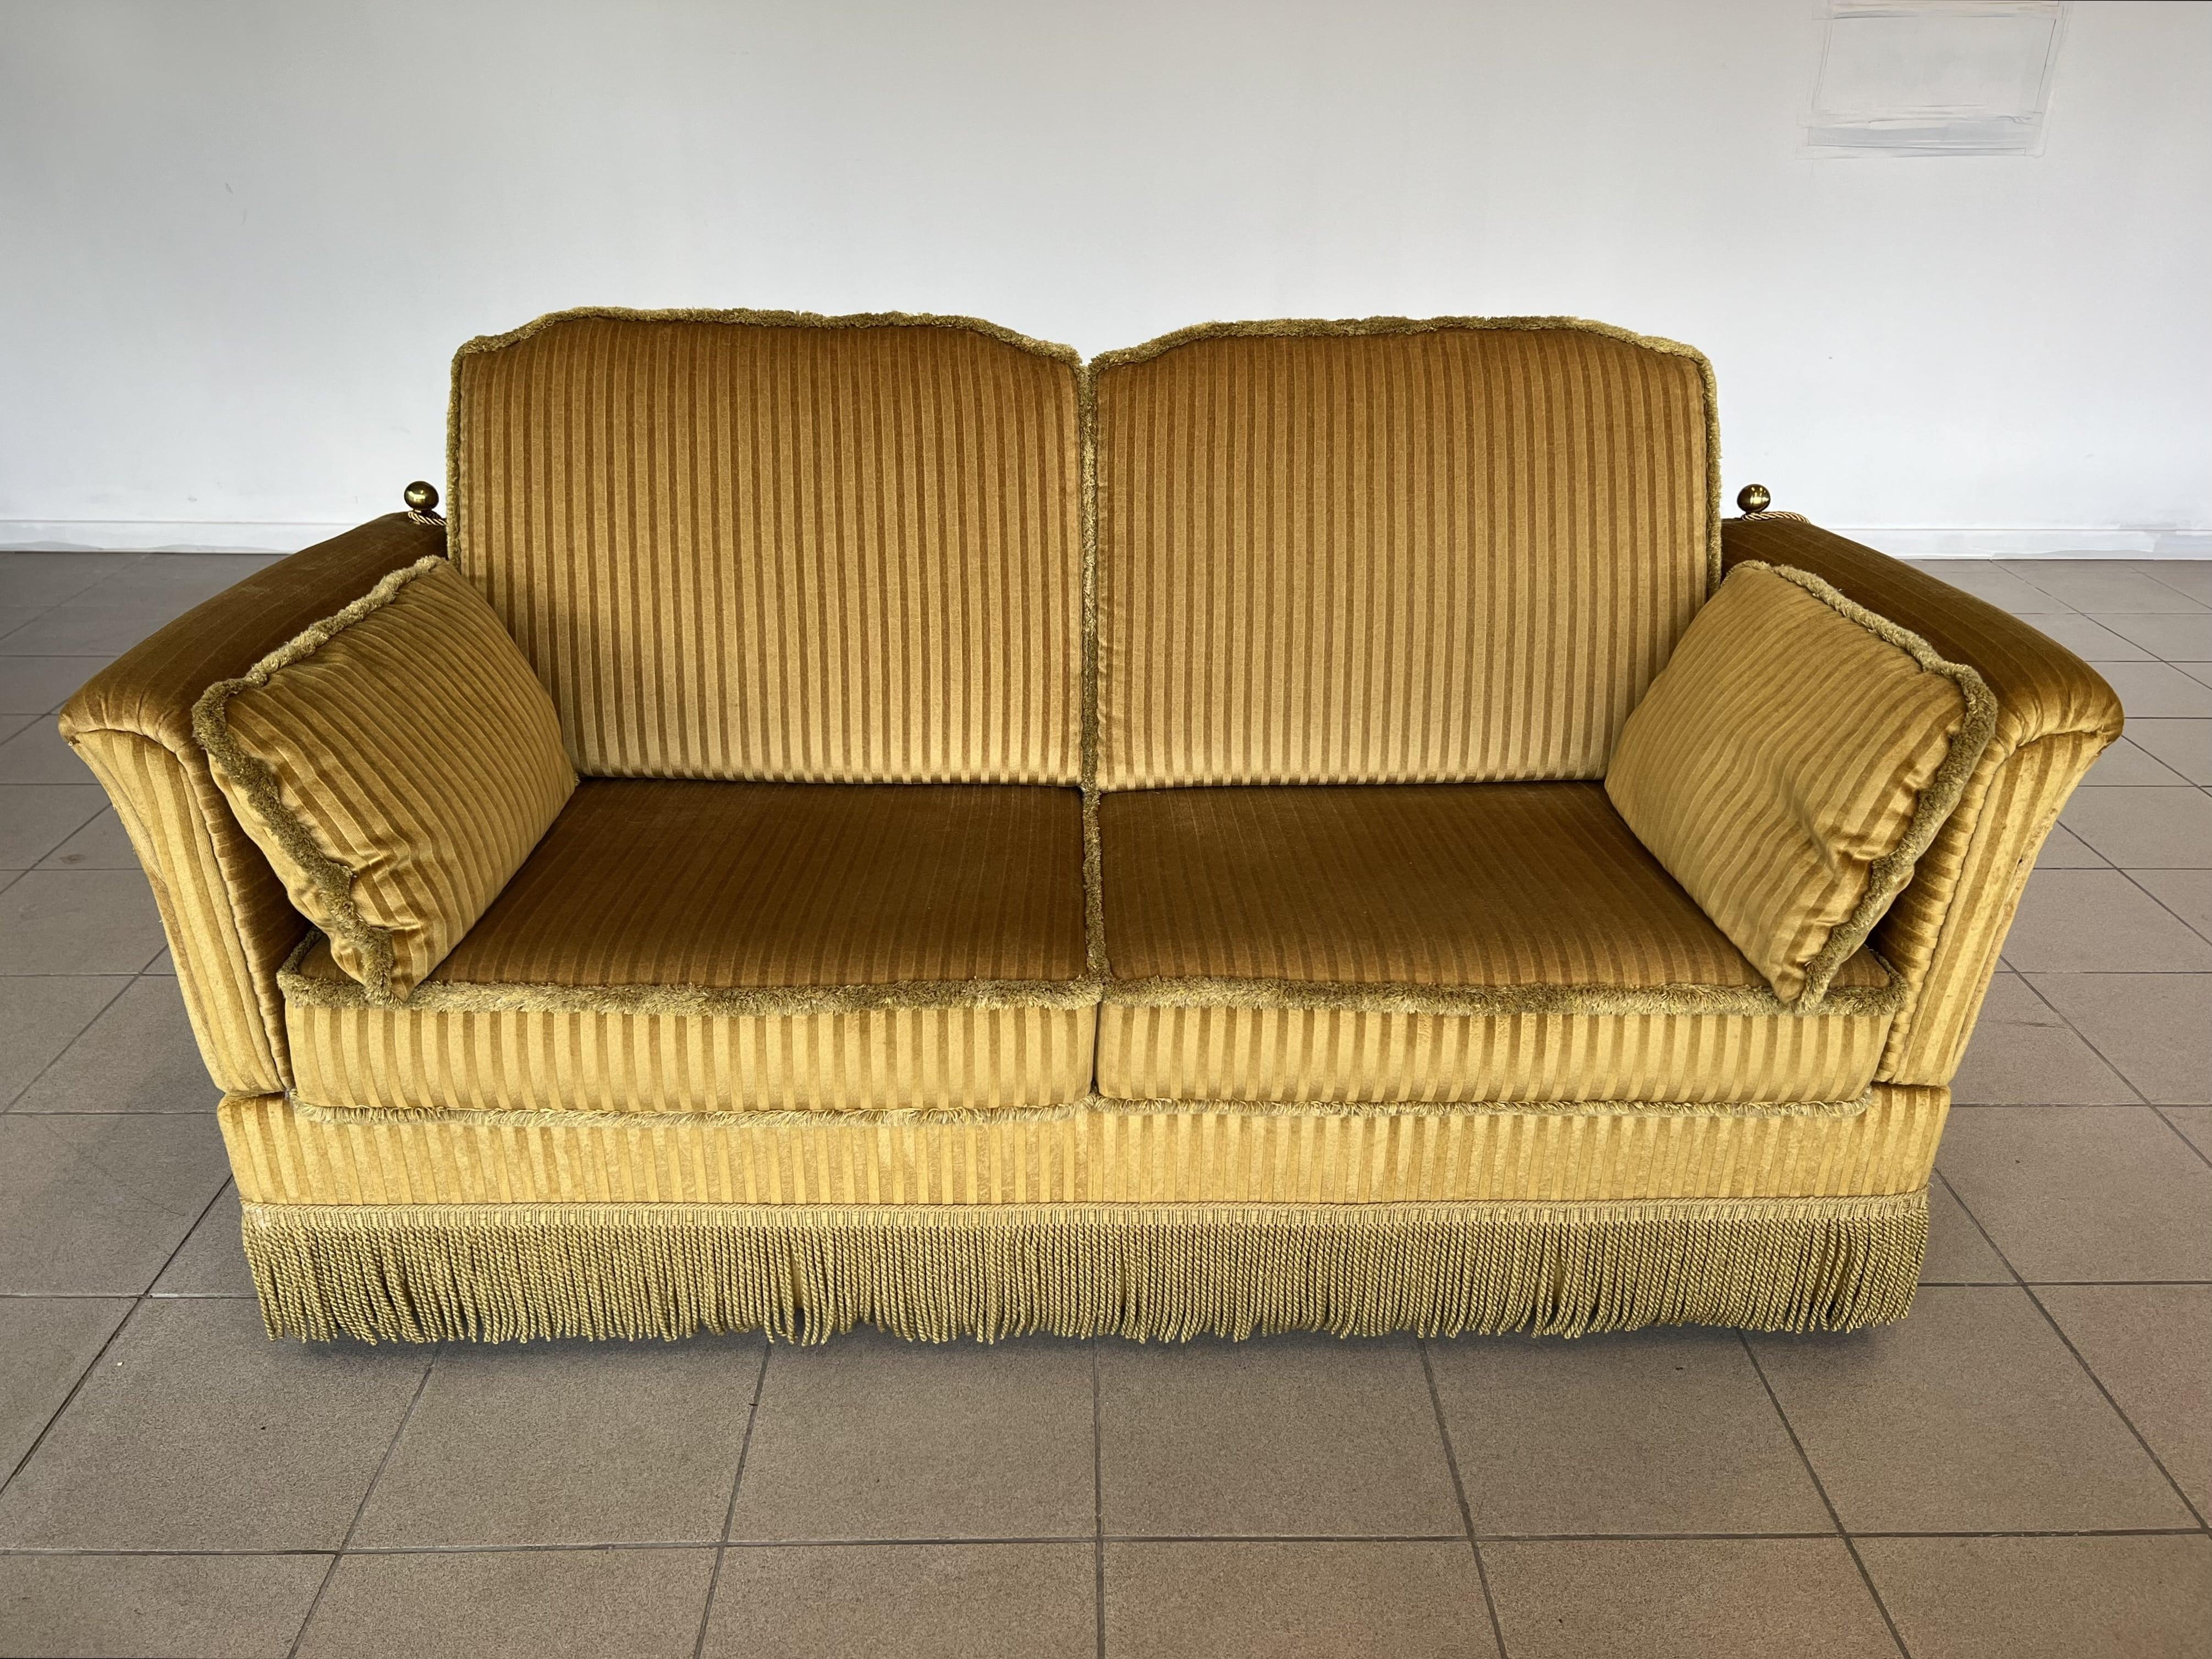 Vintage Art Deco Styled Adjustable Sofa Bed With Cushions and Fringes (Art déco) im Angebot